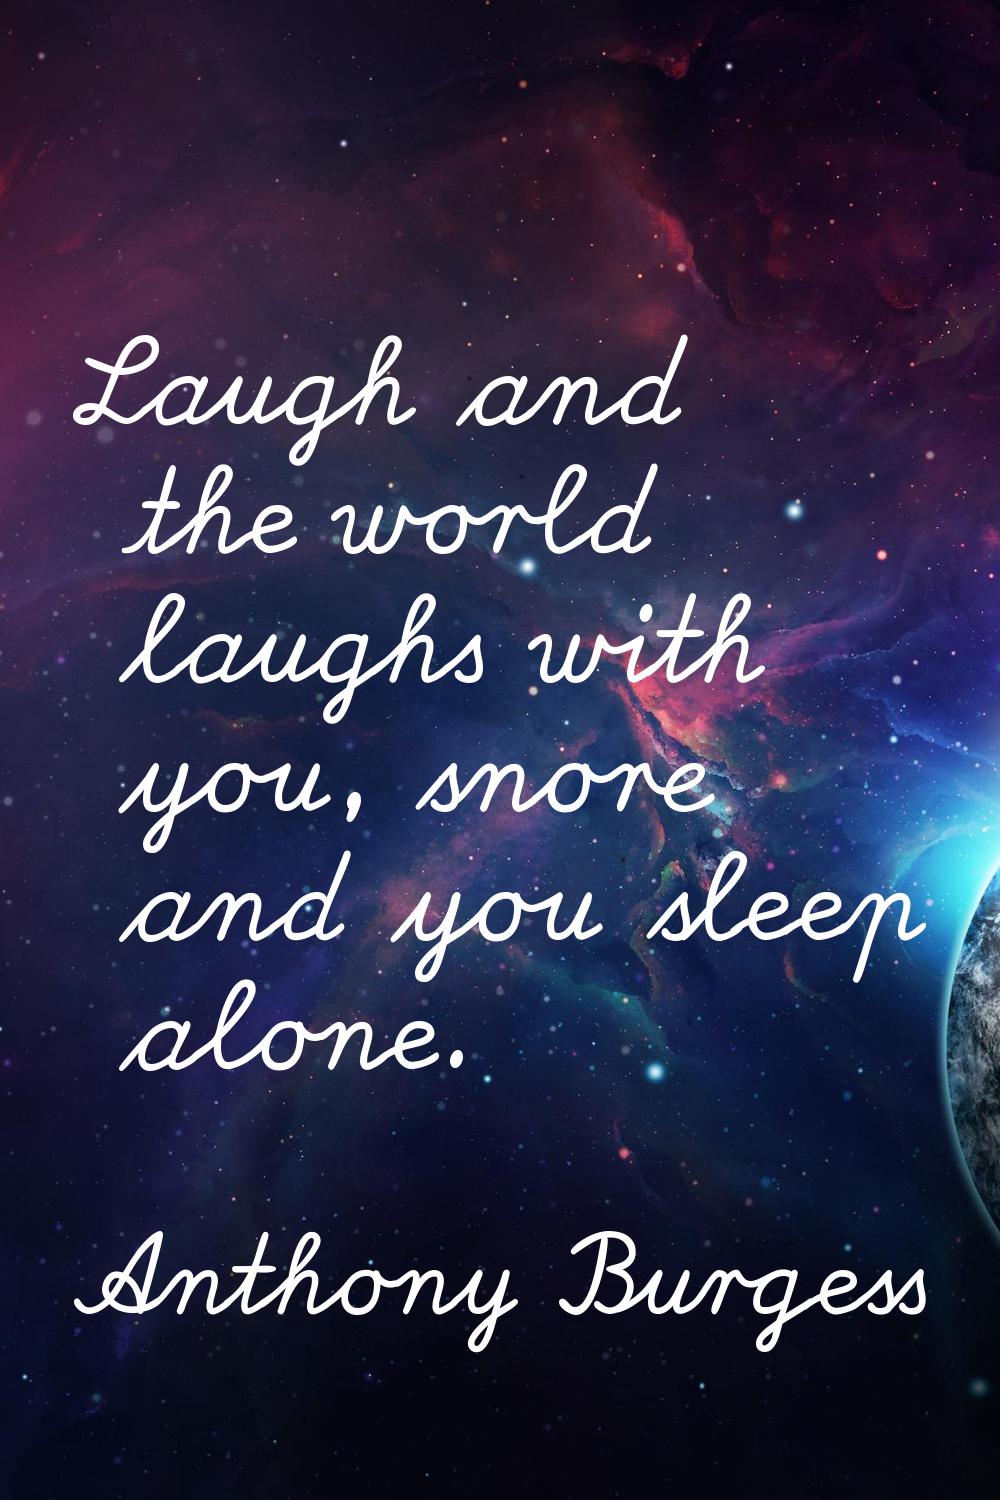 Laugh and the world laughs with you, snore and you sleep alone.